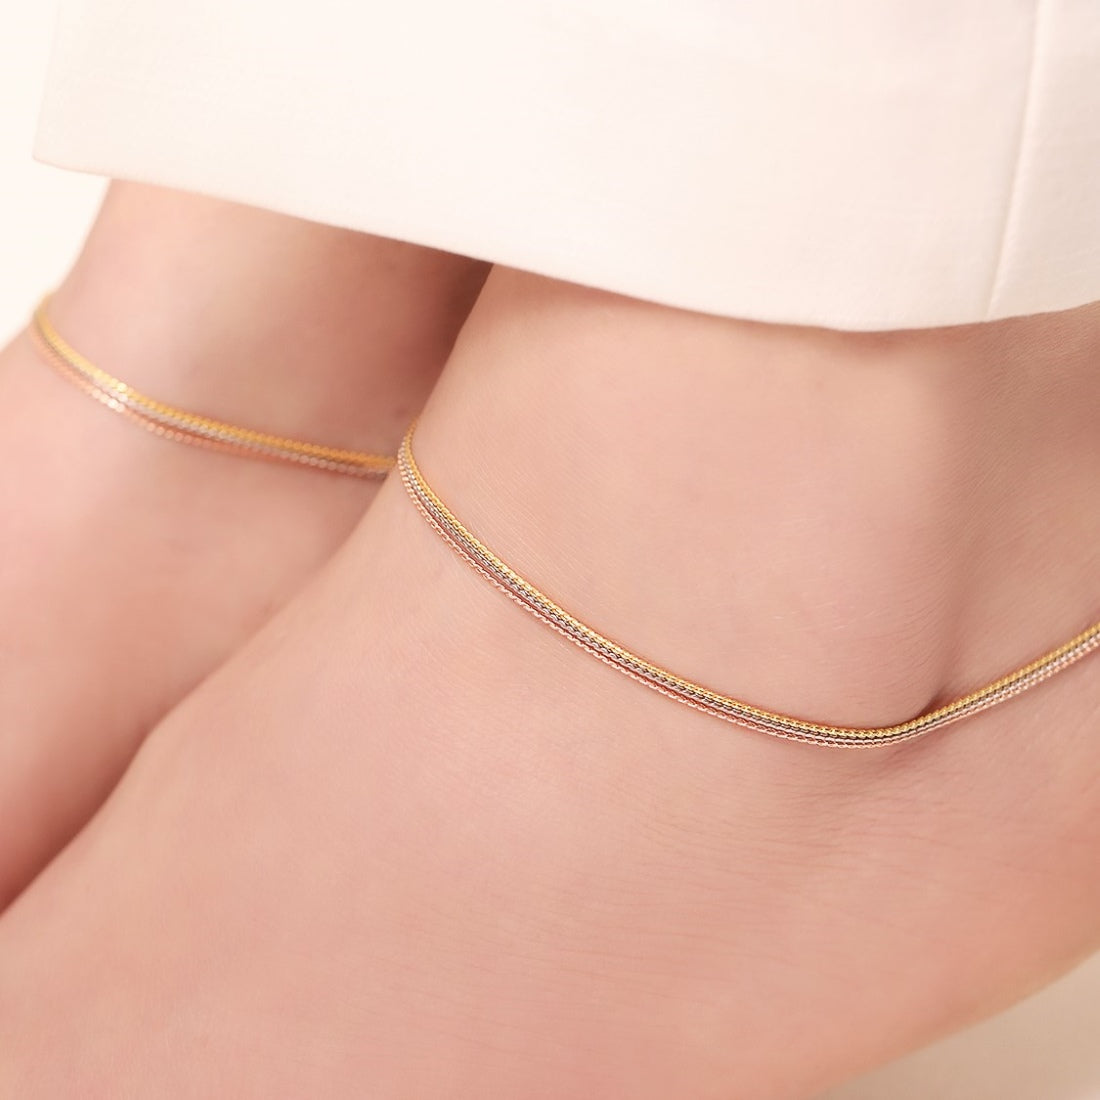 Elegance Tri-Tone Plated 925 Sterling Silver Chain Anklet